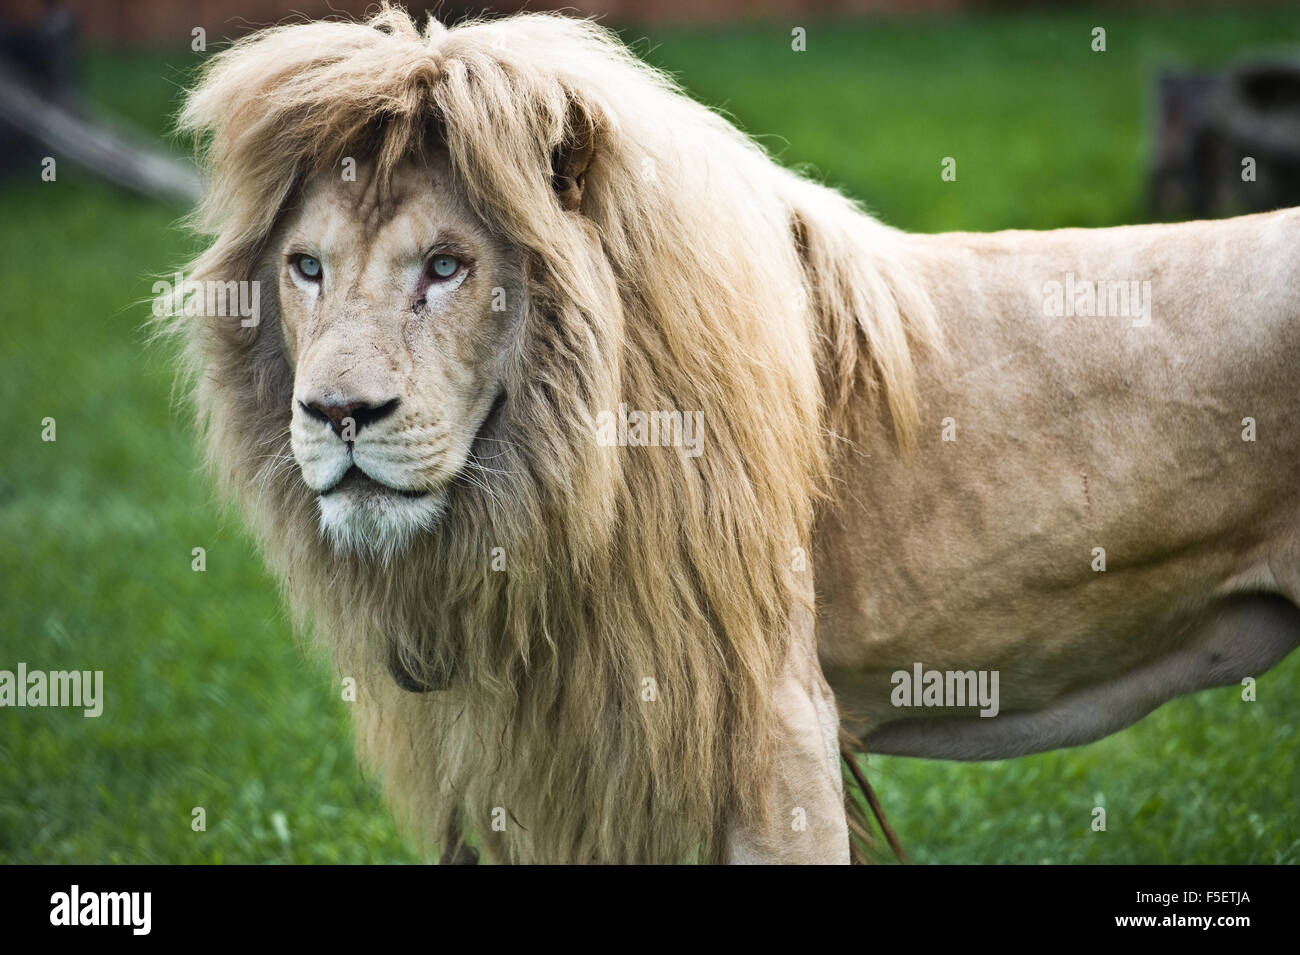 A 4-year-old white lion pictured at ZOO enclosure. Stock Photo